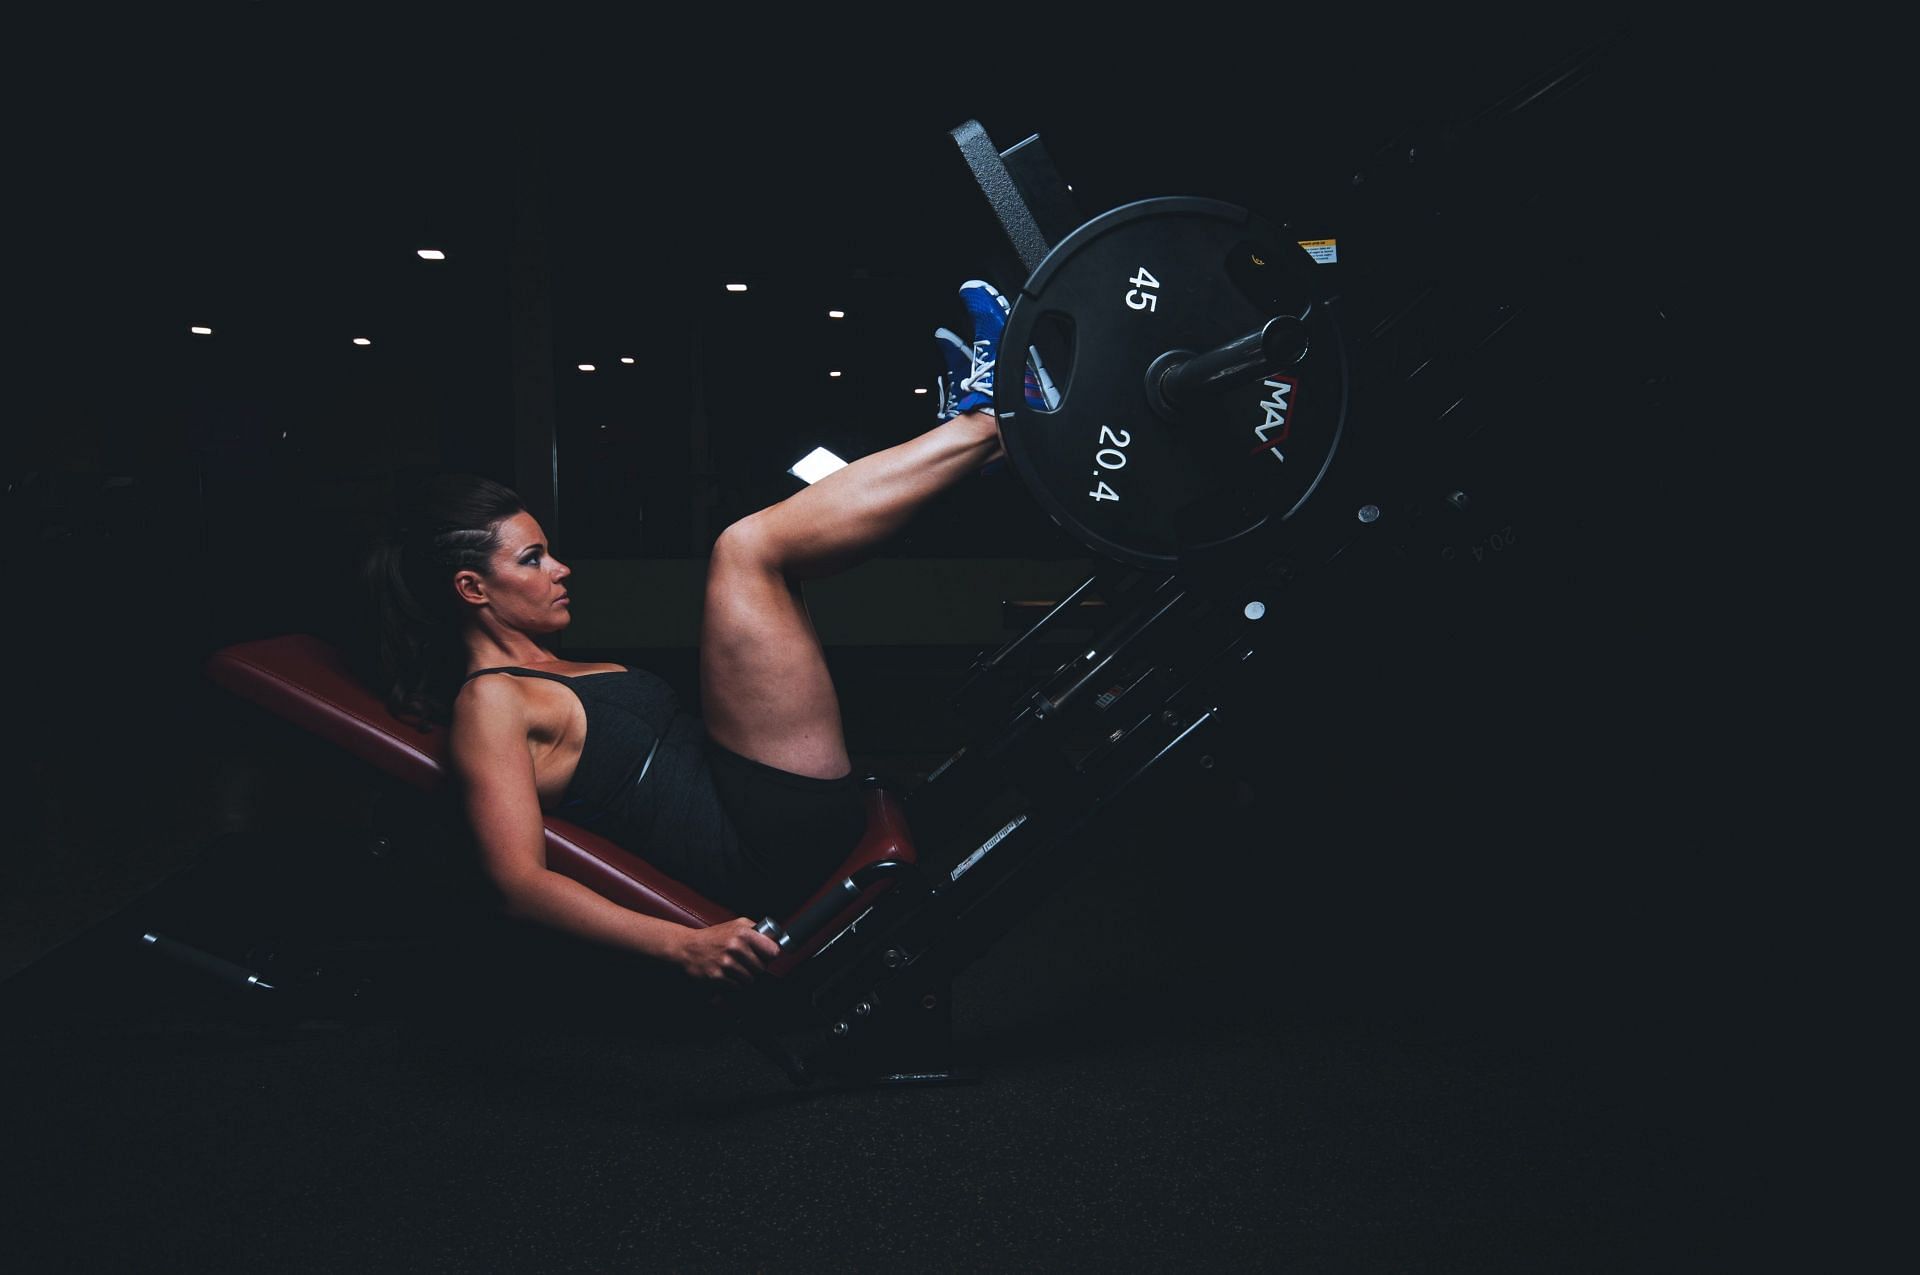 The leg press is a classic leg workout for the glutes and hamstrings. (Image via Unsplash/Scott Webb)